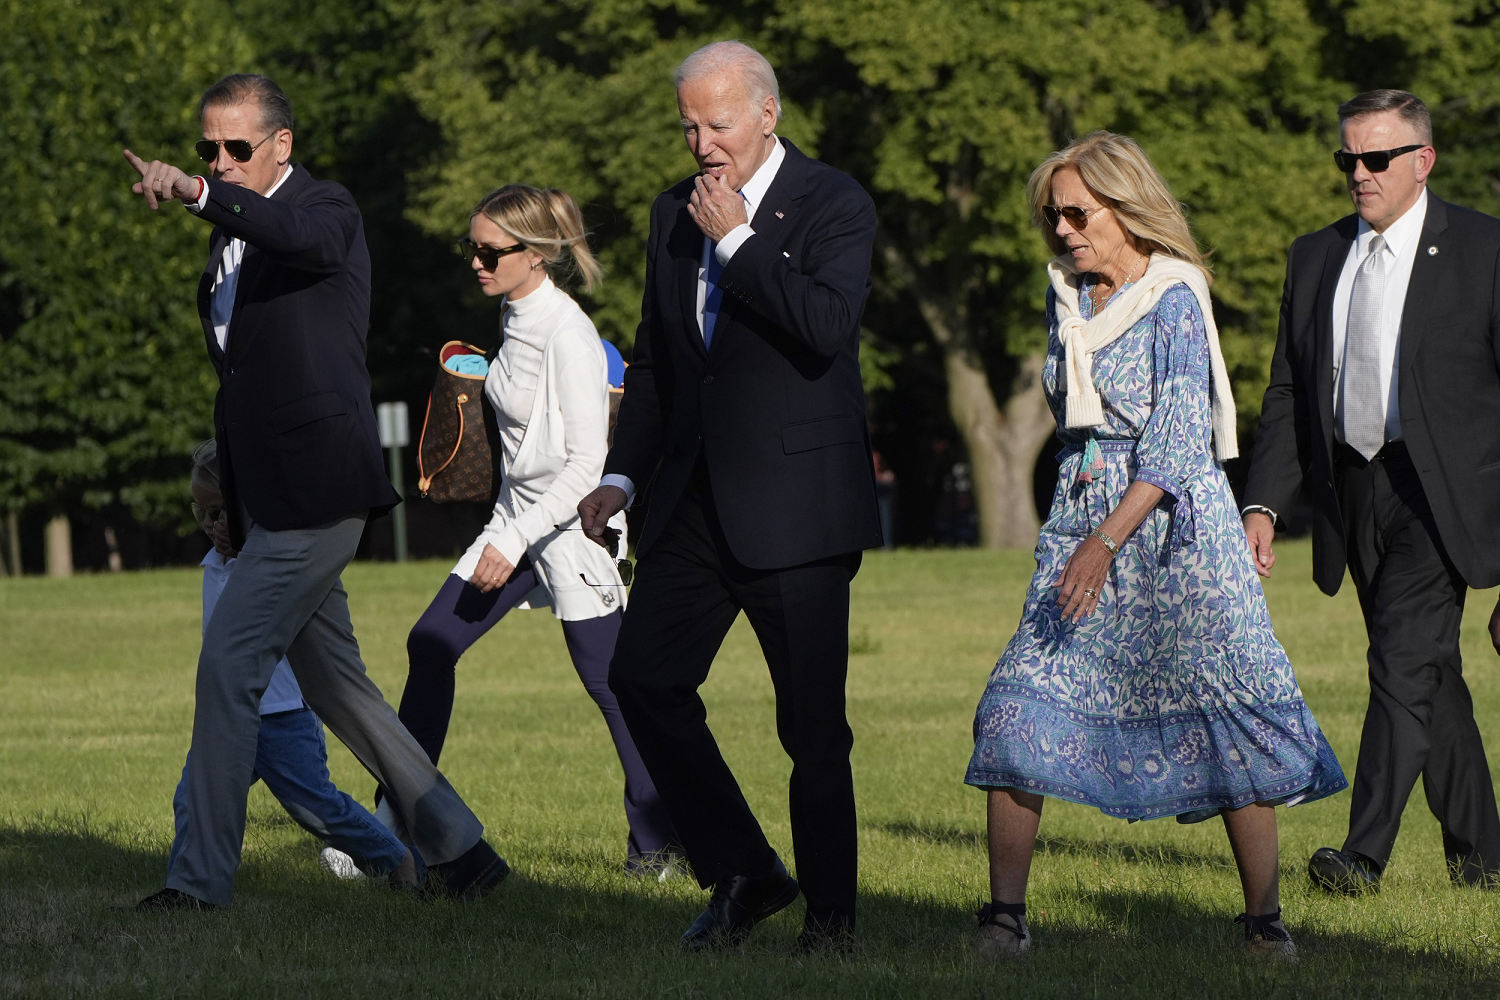 'It's Shakespearean': Long-simmering tensions between Biden's family and aides spill out